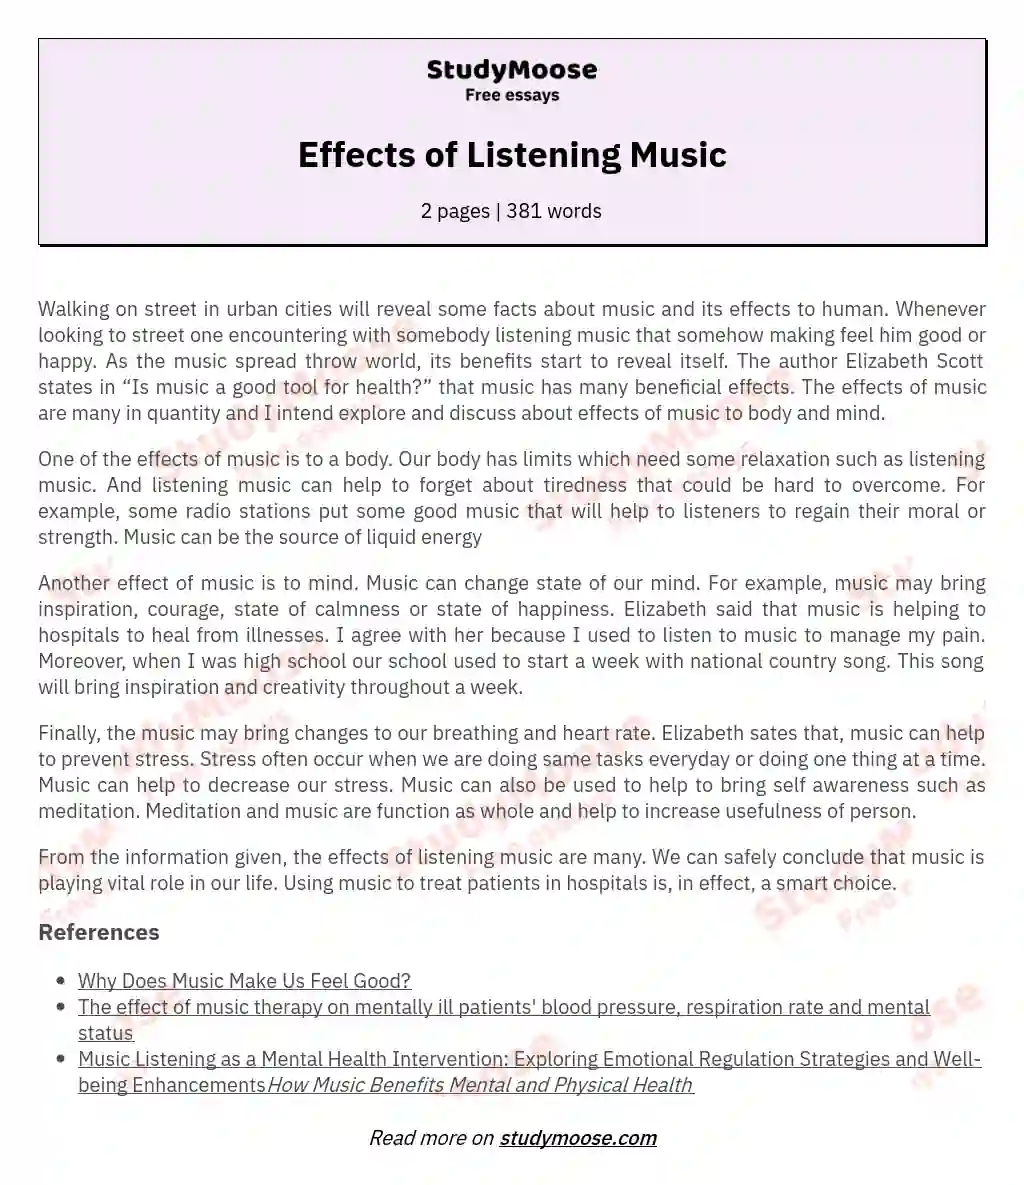 Effects of Listening Music